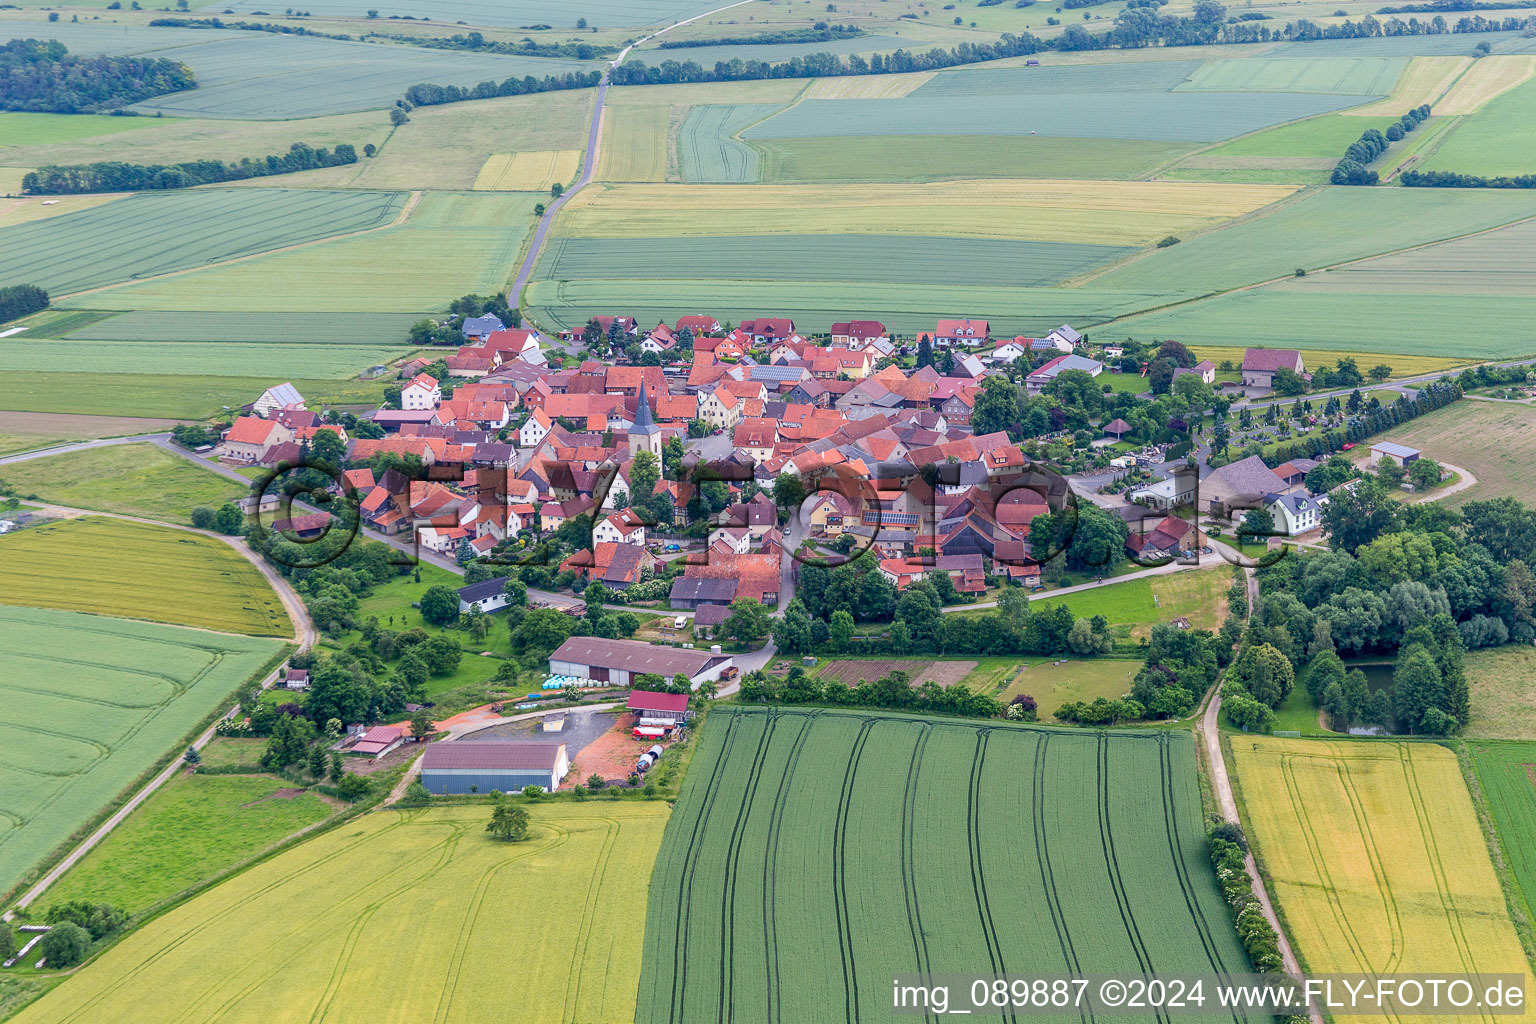 Village - view on the edge of agricultural fields and farmland in the district Rothausen in Hoechheim in the state Bavaria, Germany